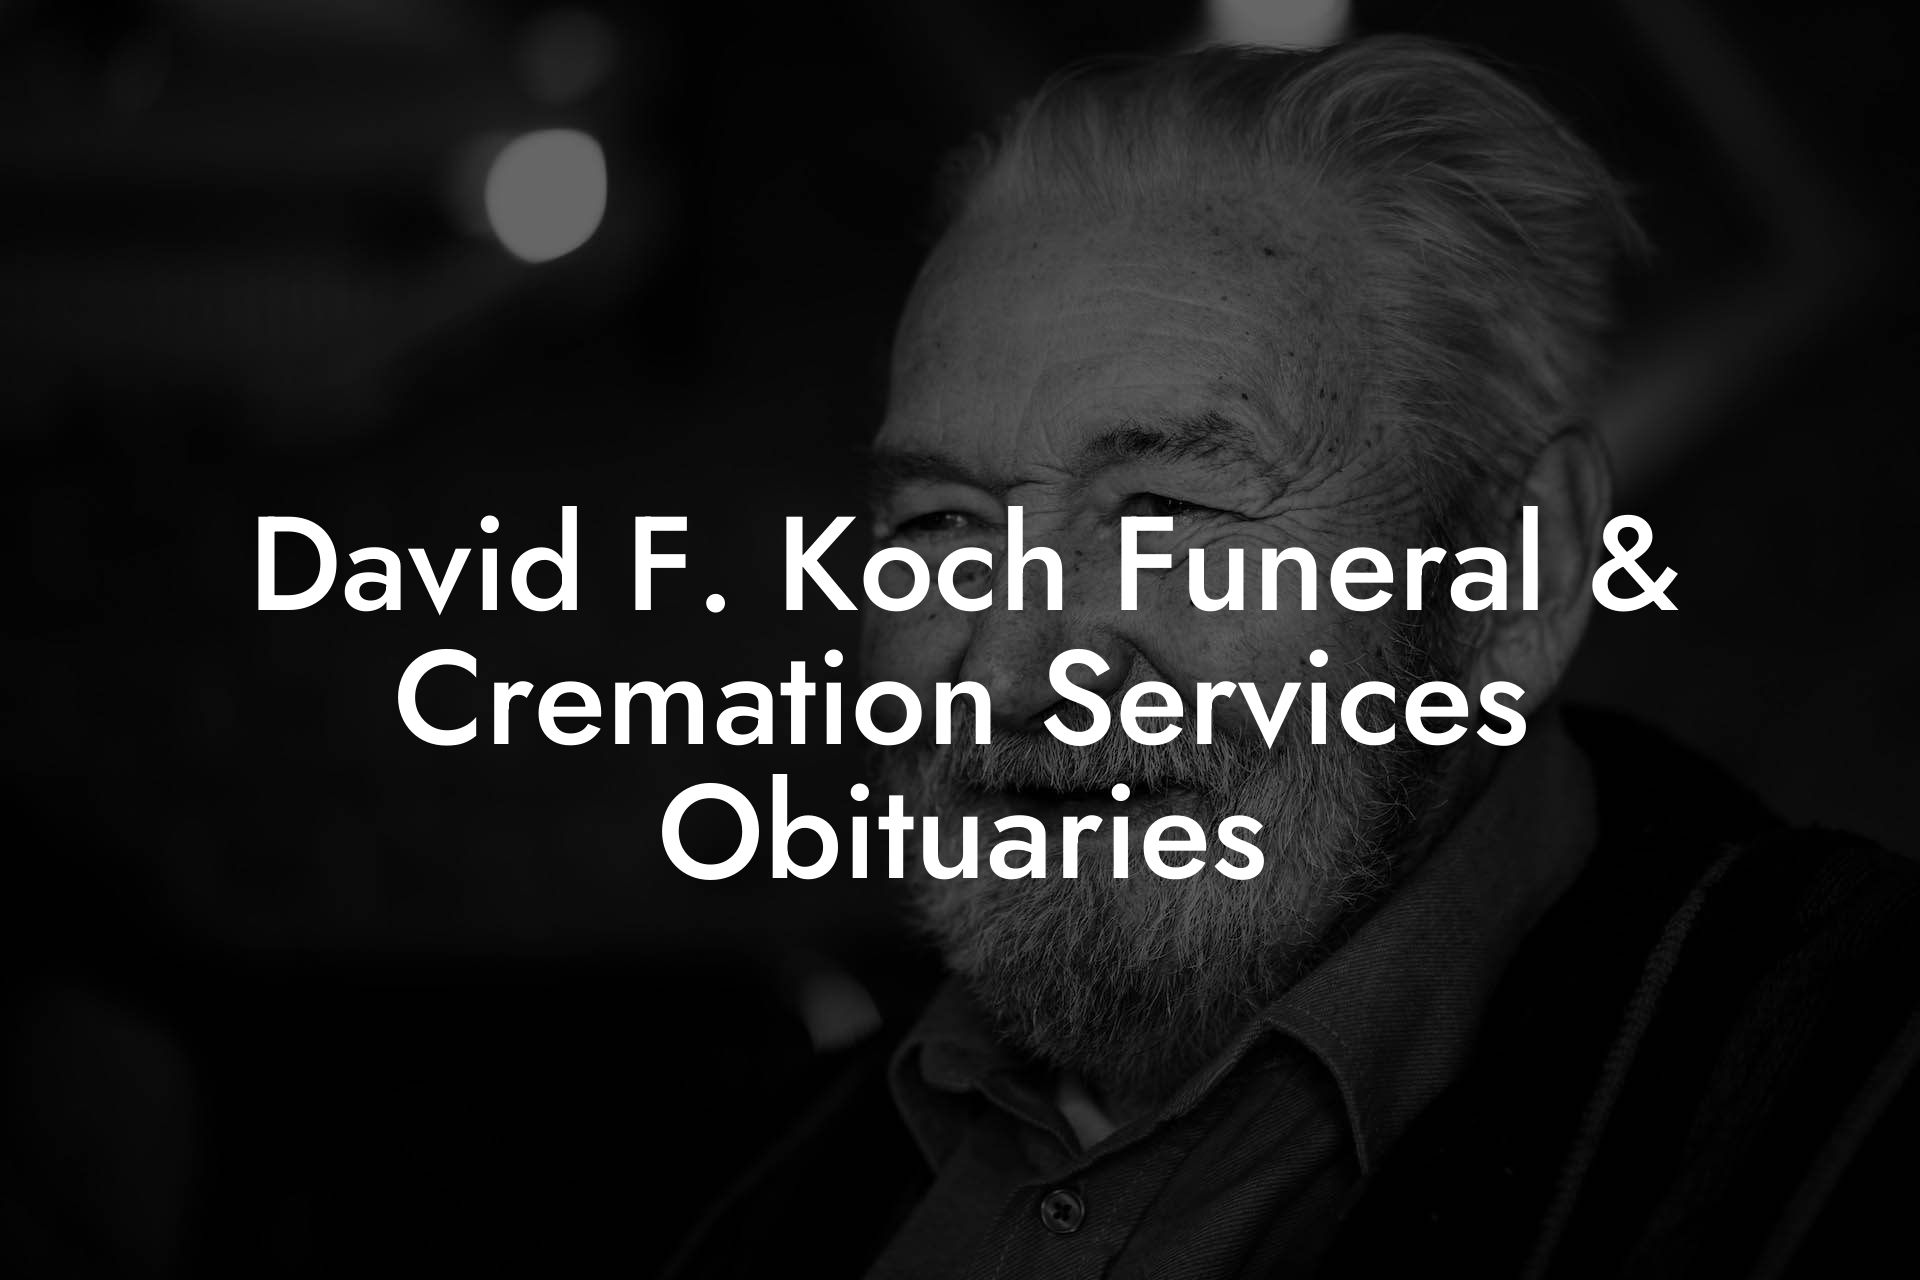 David F. Koch Funeral & Cremation Services Obituaries